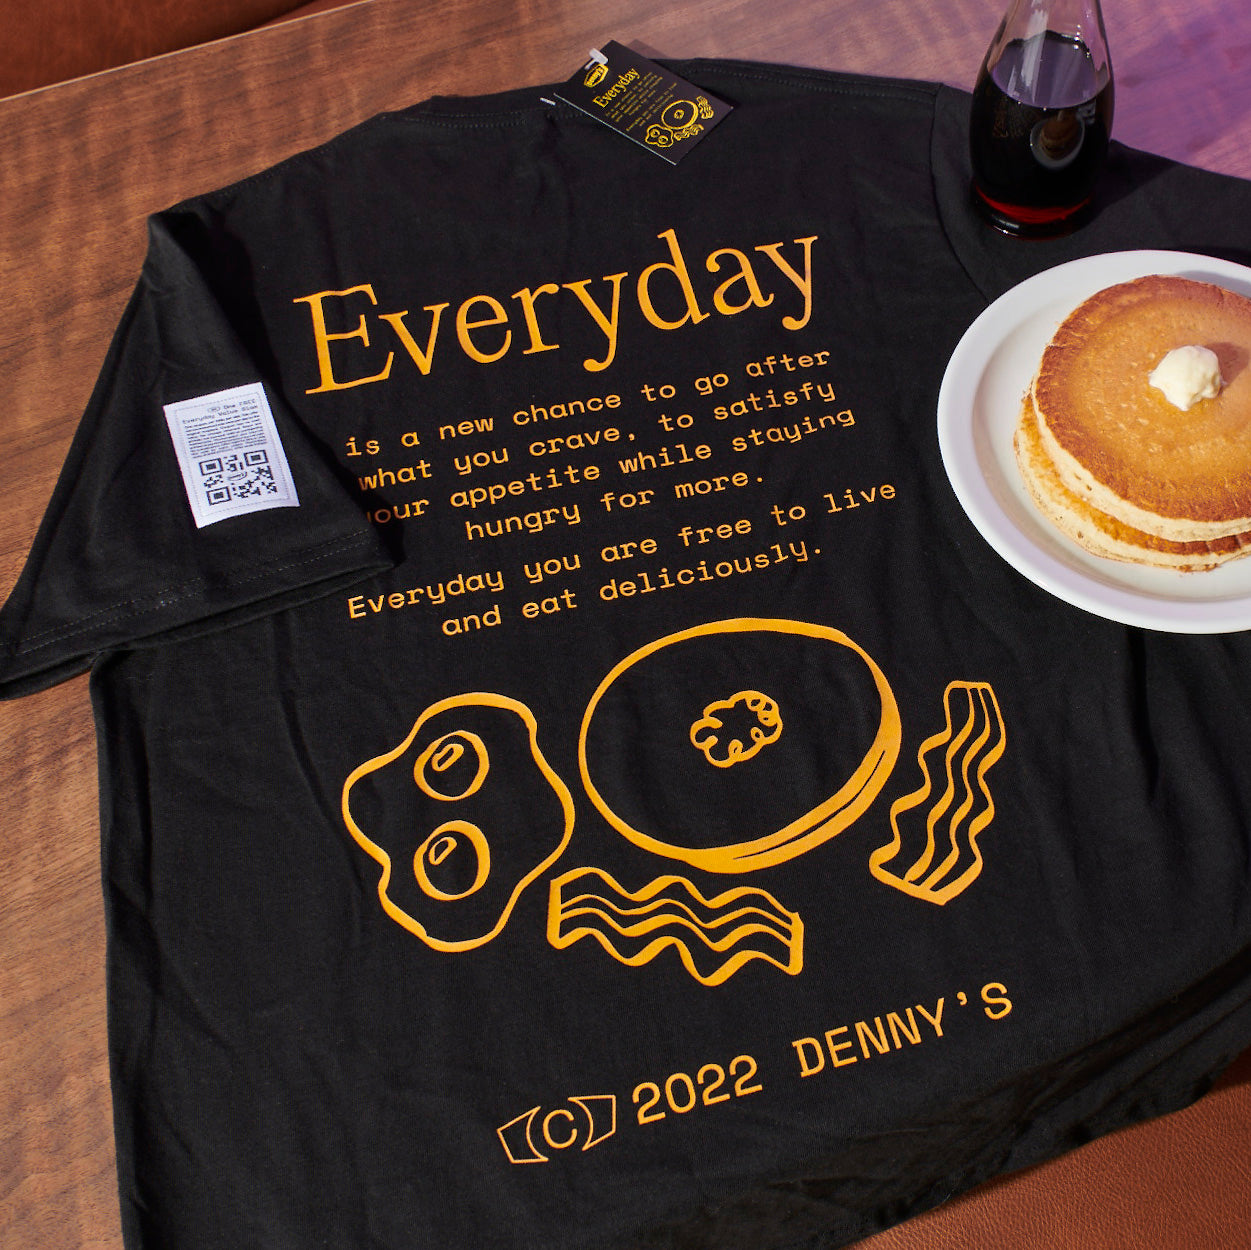 The Everyday Value Tee